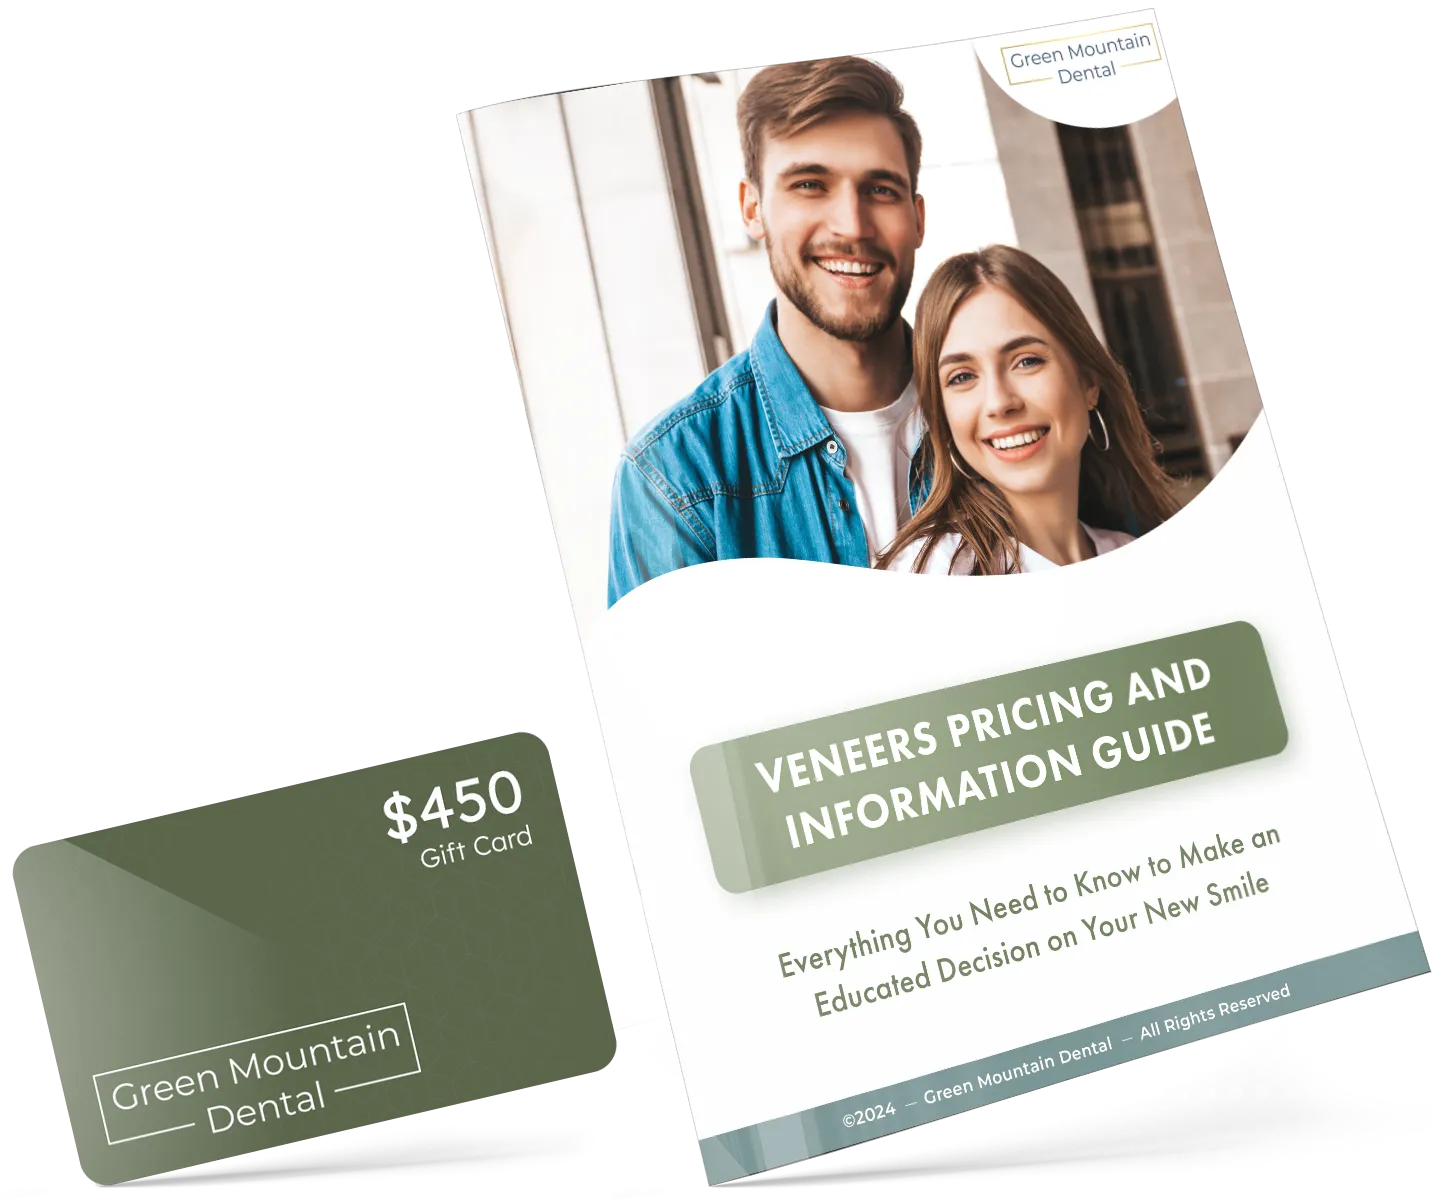 Veneers pricing and infromation guide